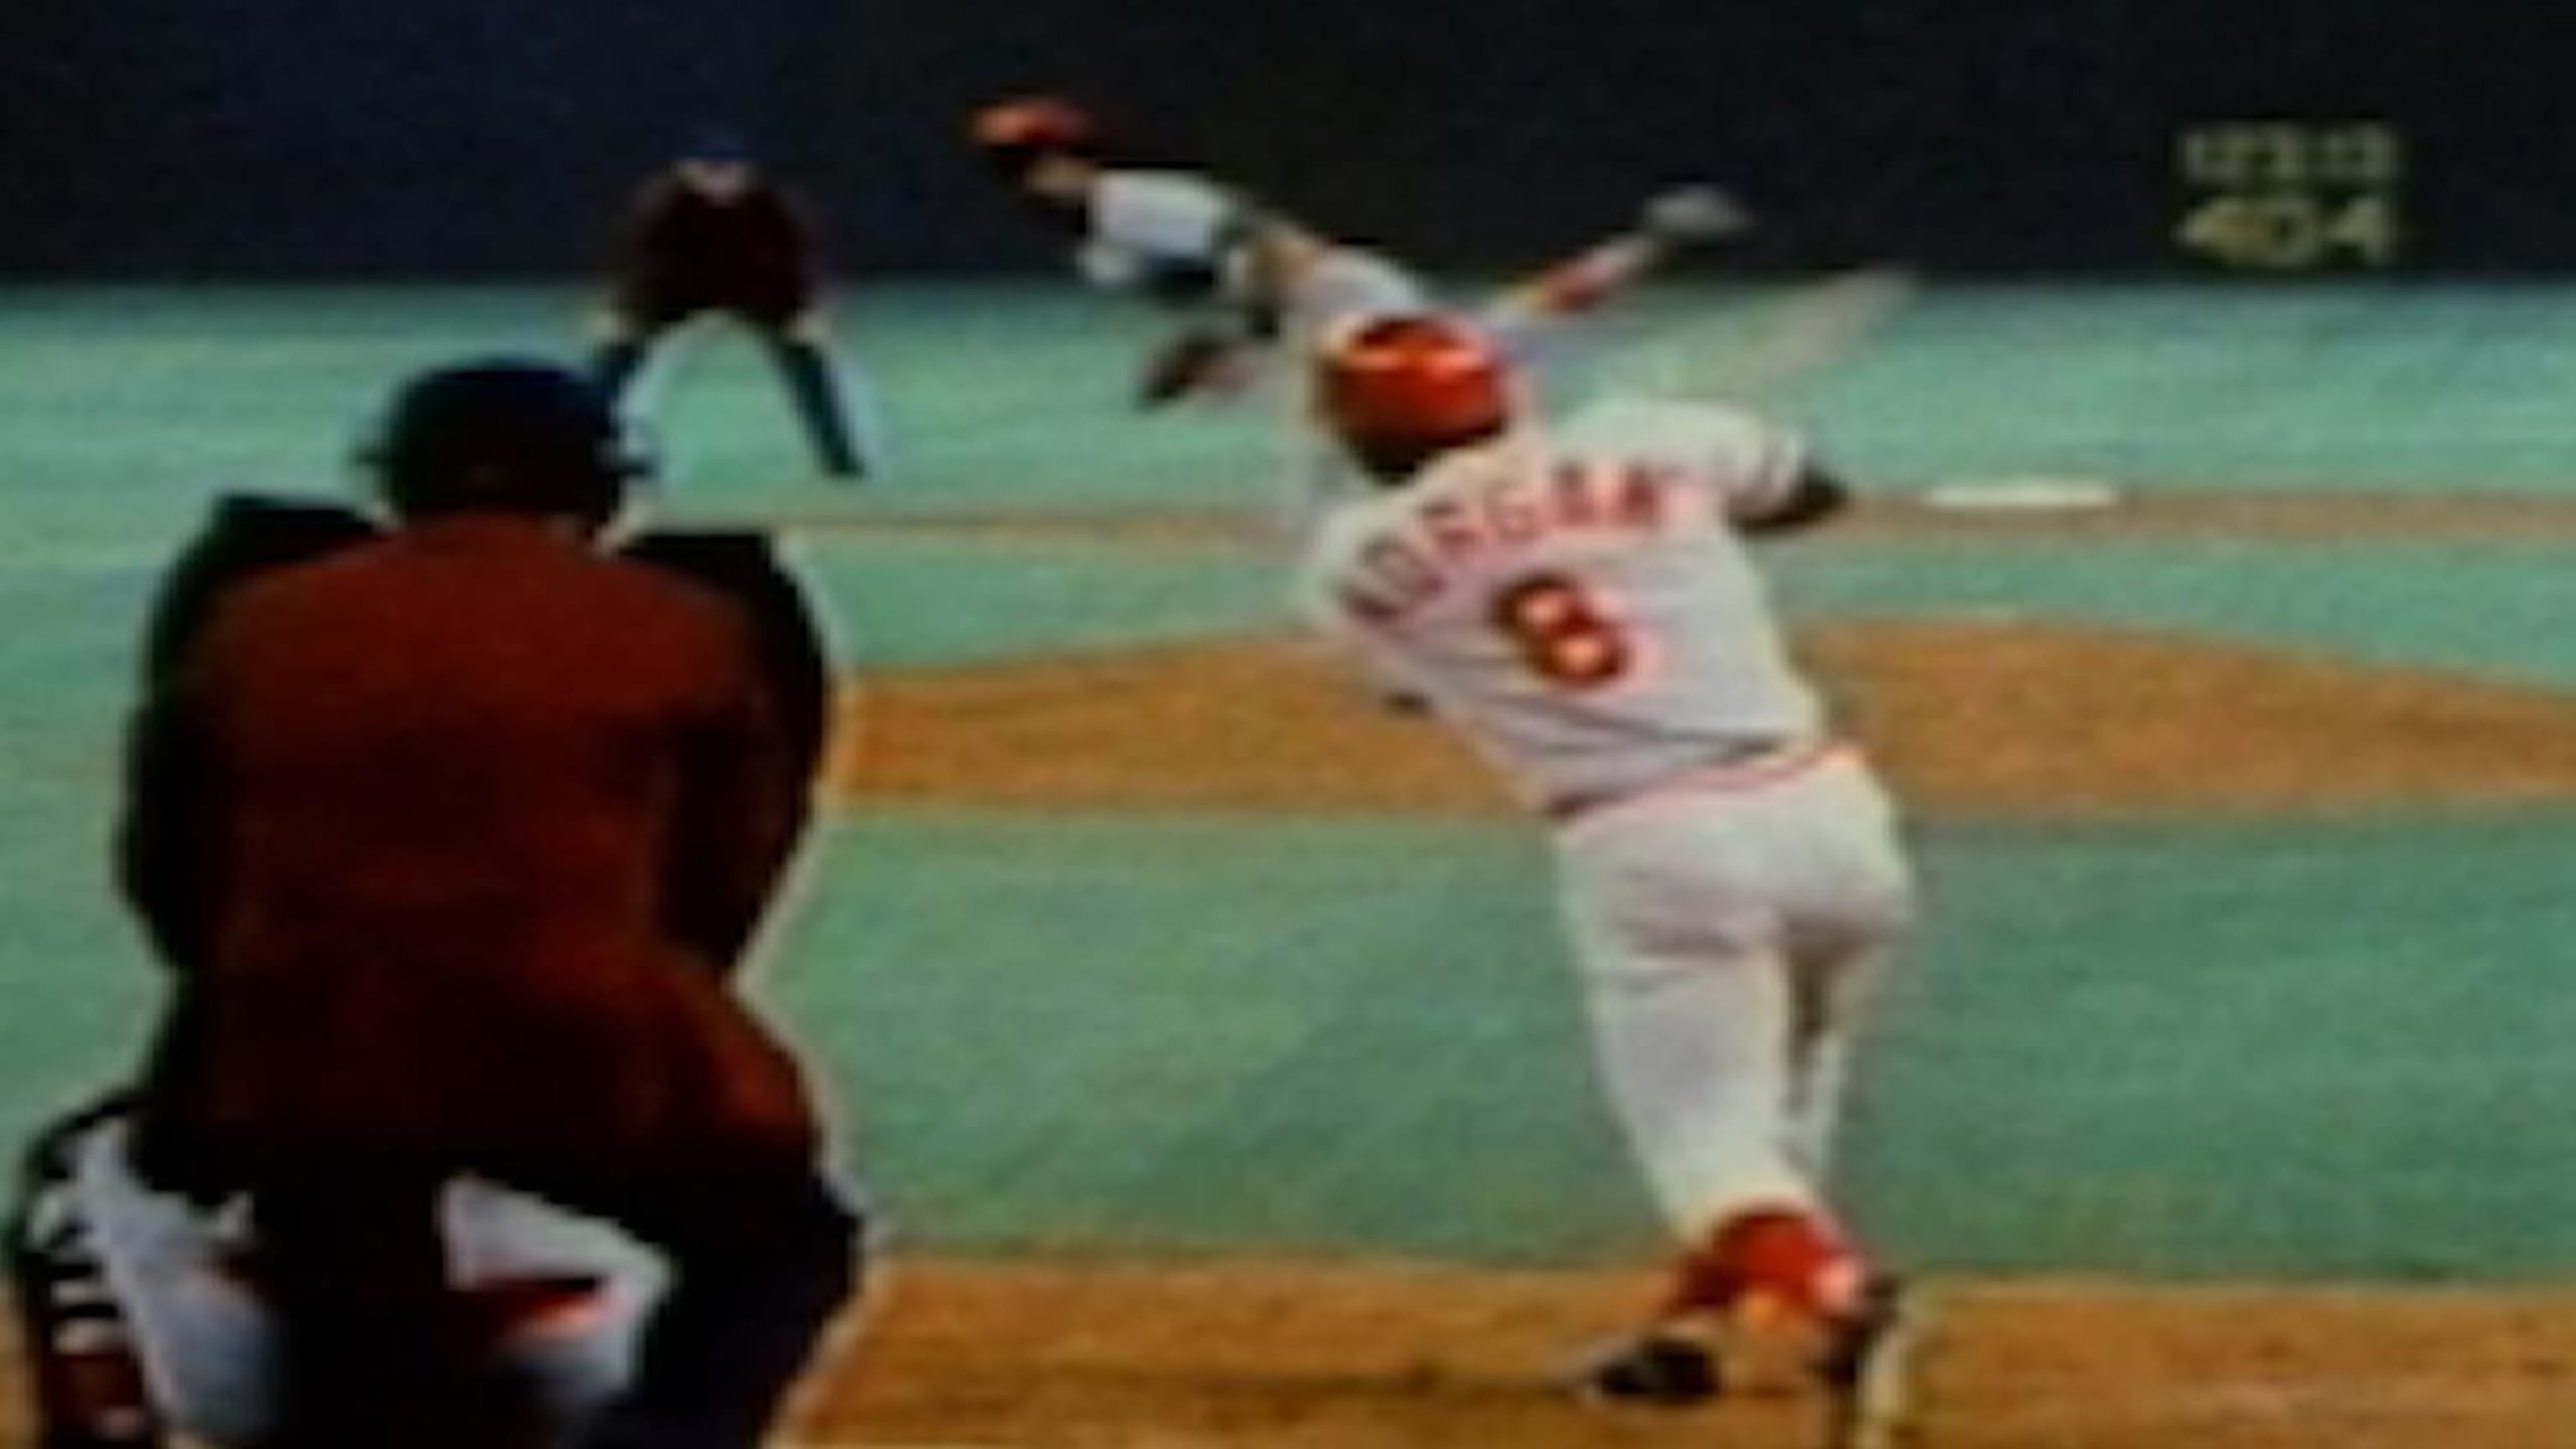 Joe Morgan (MLB Hall of Fame Infielder and Broadcaster) - On This Day